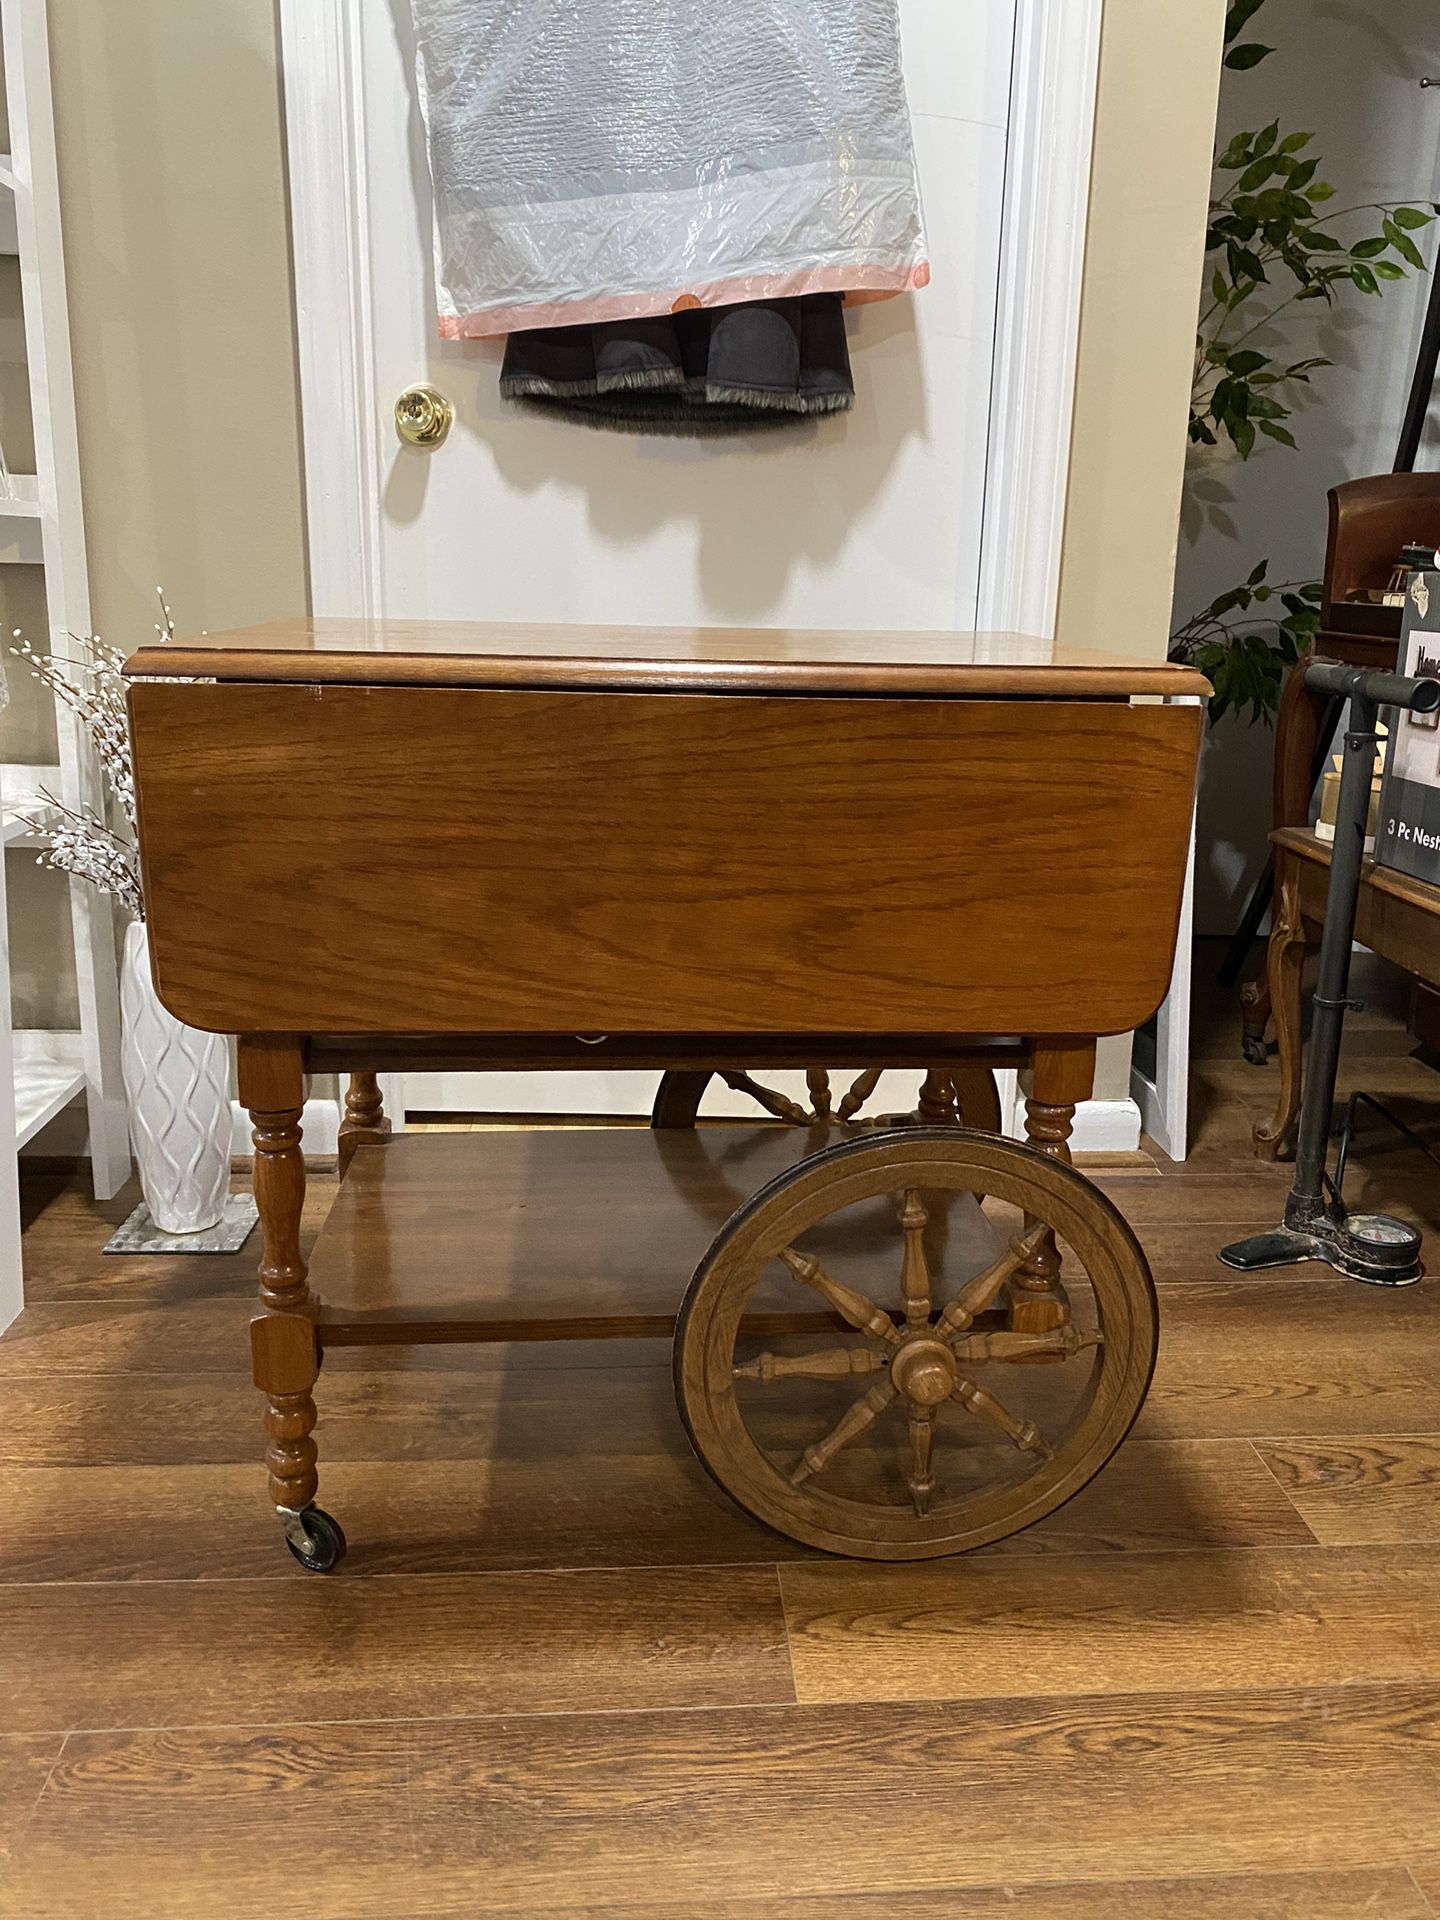 Vintage Maple Colonial Early American Drop Leaf Bar Cart, Tea Cart, with wooden rolling wheels!